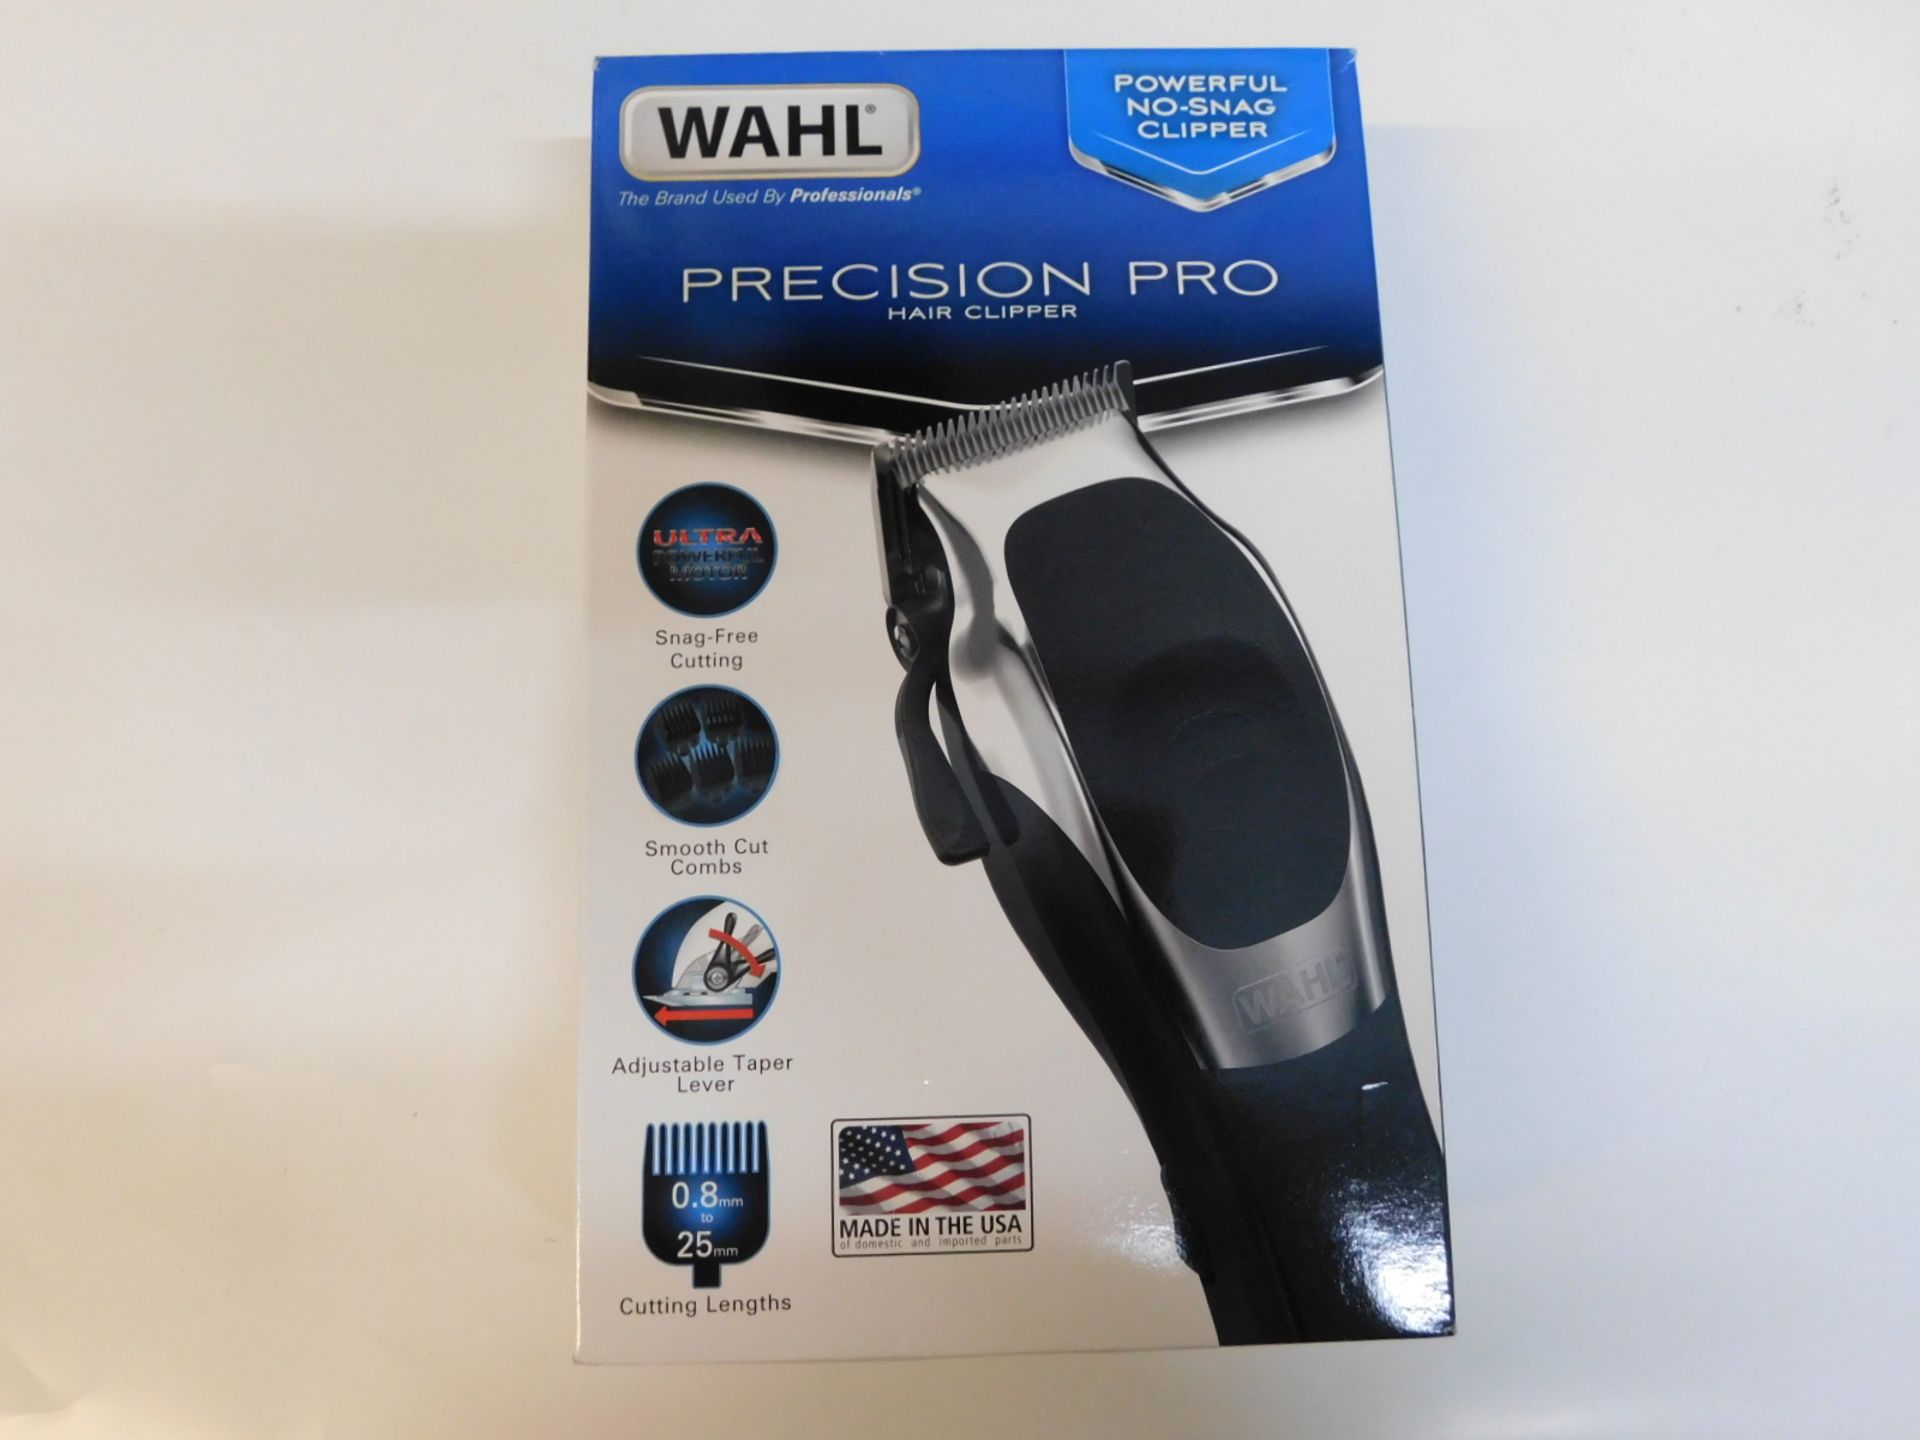 1 BOXED WAHL ELECTRIC PRECISION PRO HAIR CLIPPER KIT RRP Â£69.99